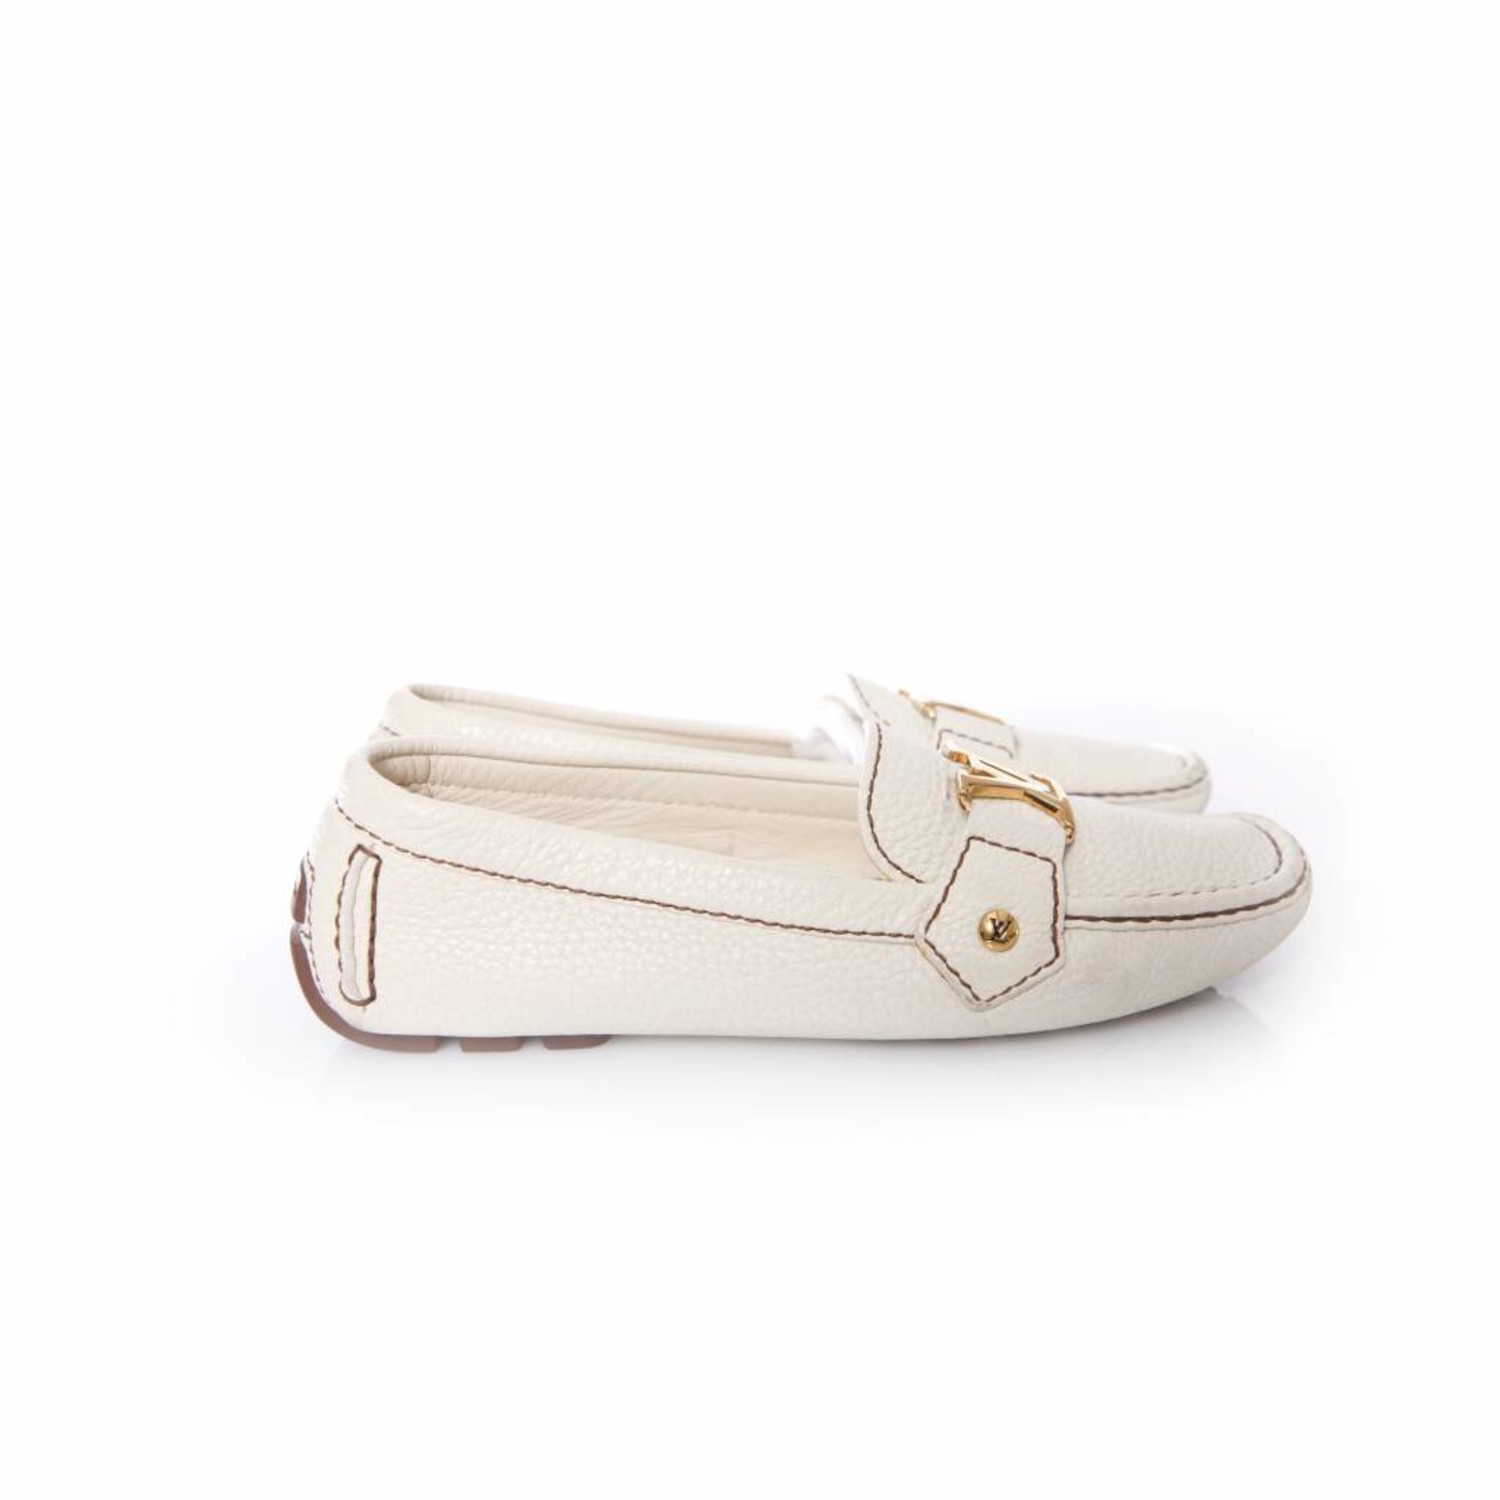 Louis VUITTON, White summer loafers with tassel uppers. …